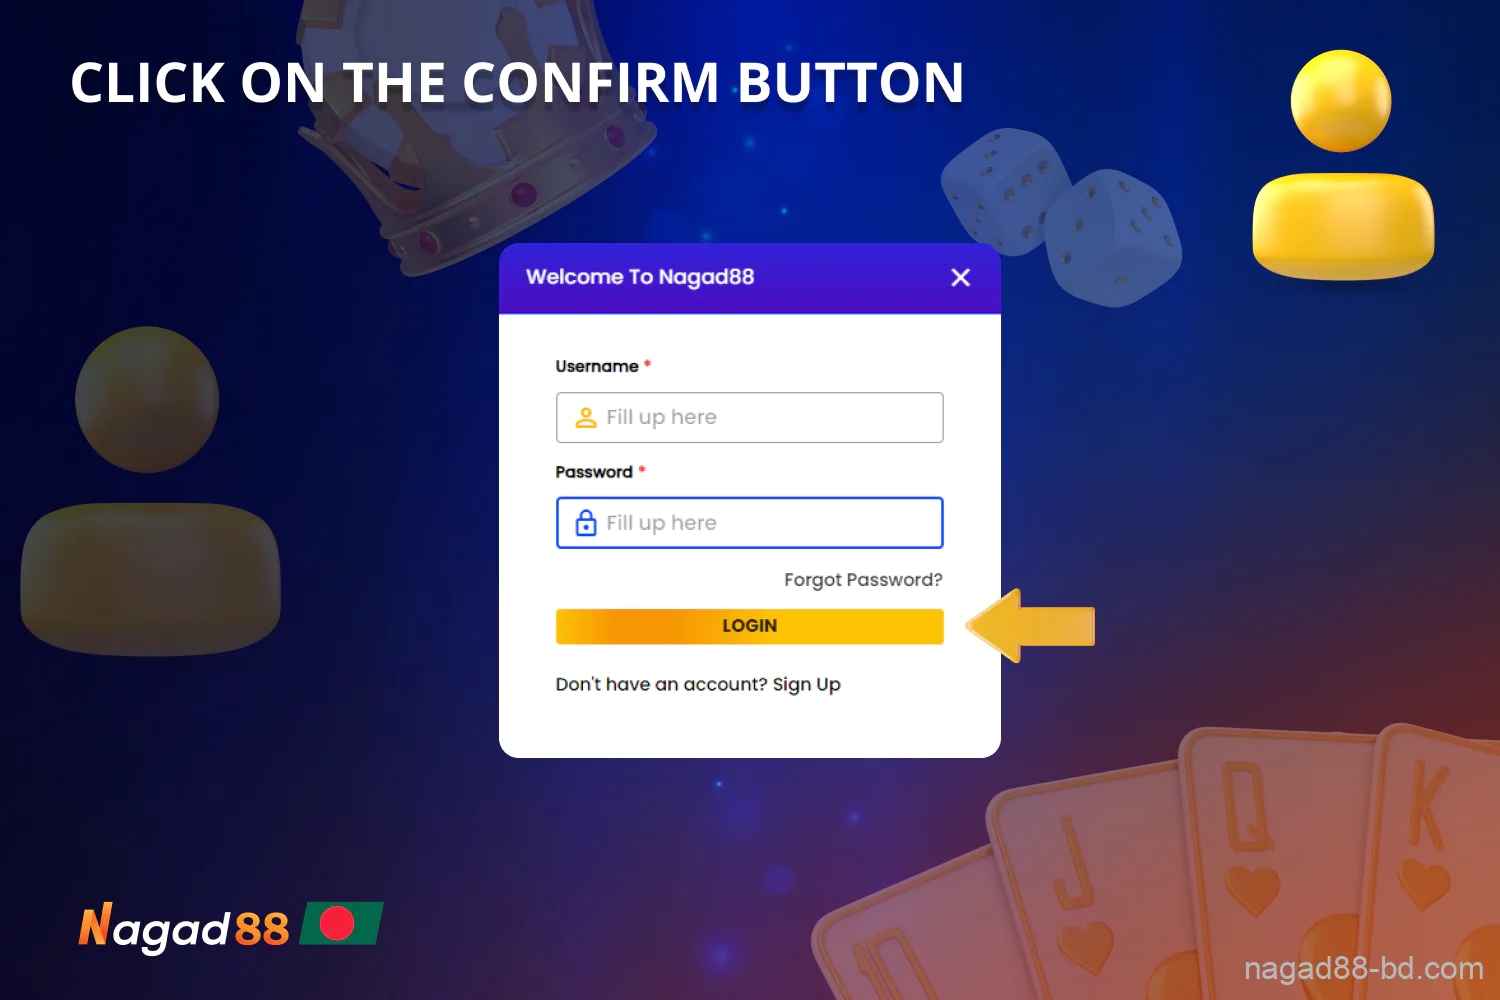 To confirm login to your account at Nagad88 Casino, you need to click on the confirm button